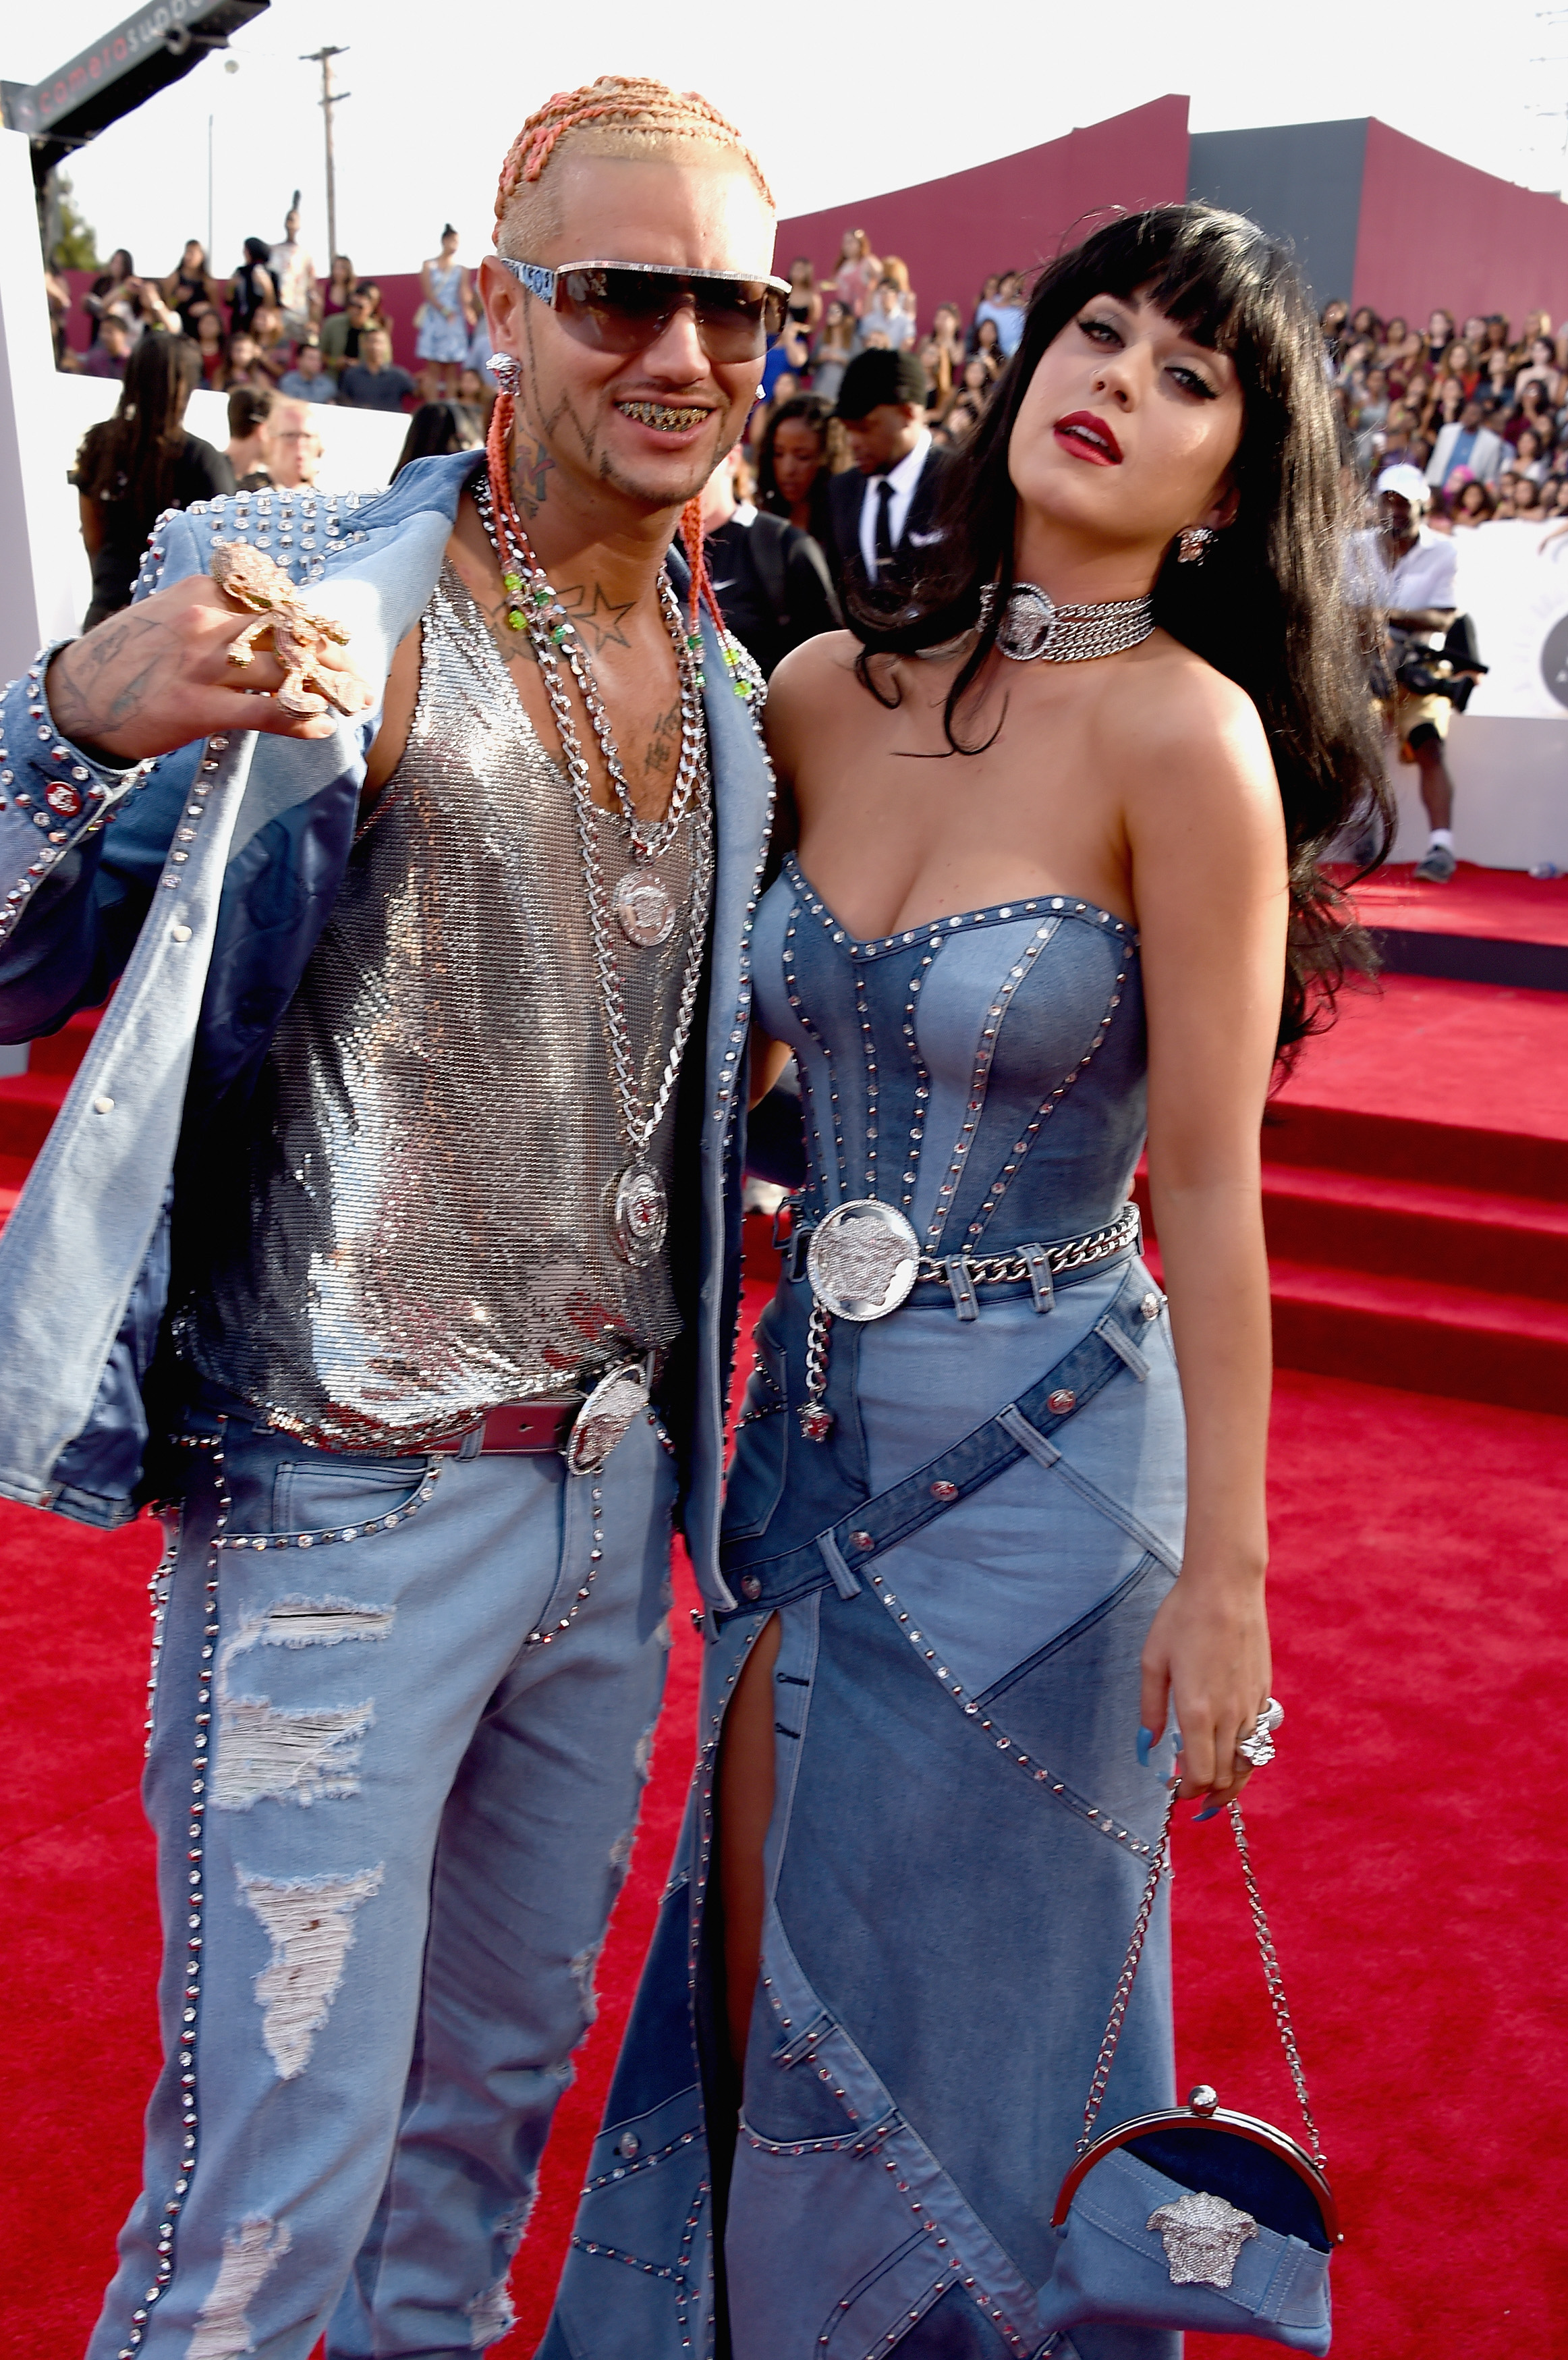 Riff Raff and Katy Perry attend the 2014 MTV Video Music Awards at The Forum on August 24, 2014 in Inglewood, California. (Steve Granitz—WireImage/Getty Images)